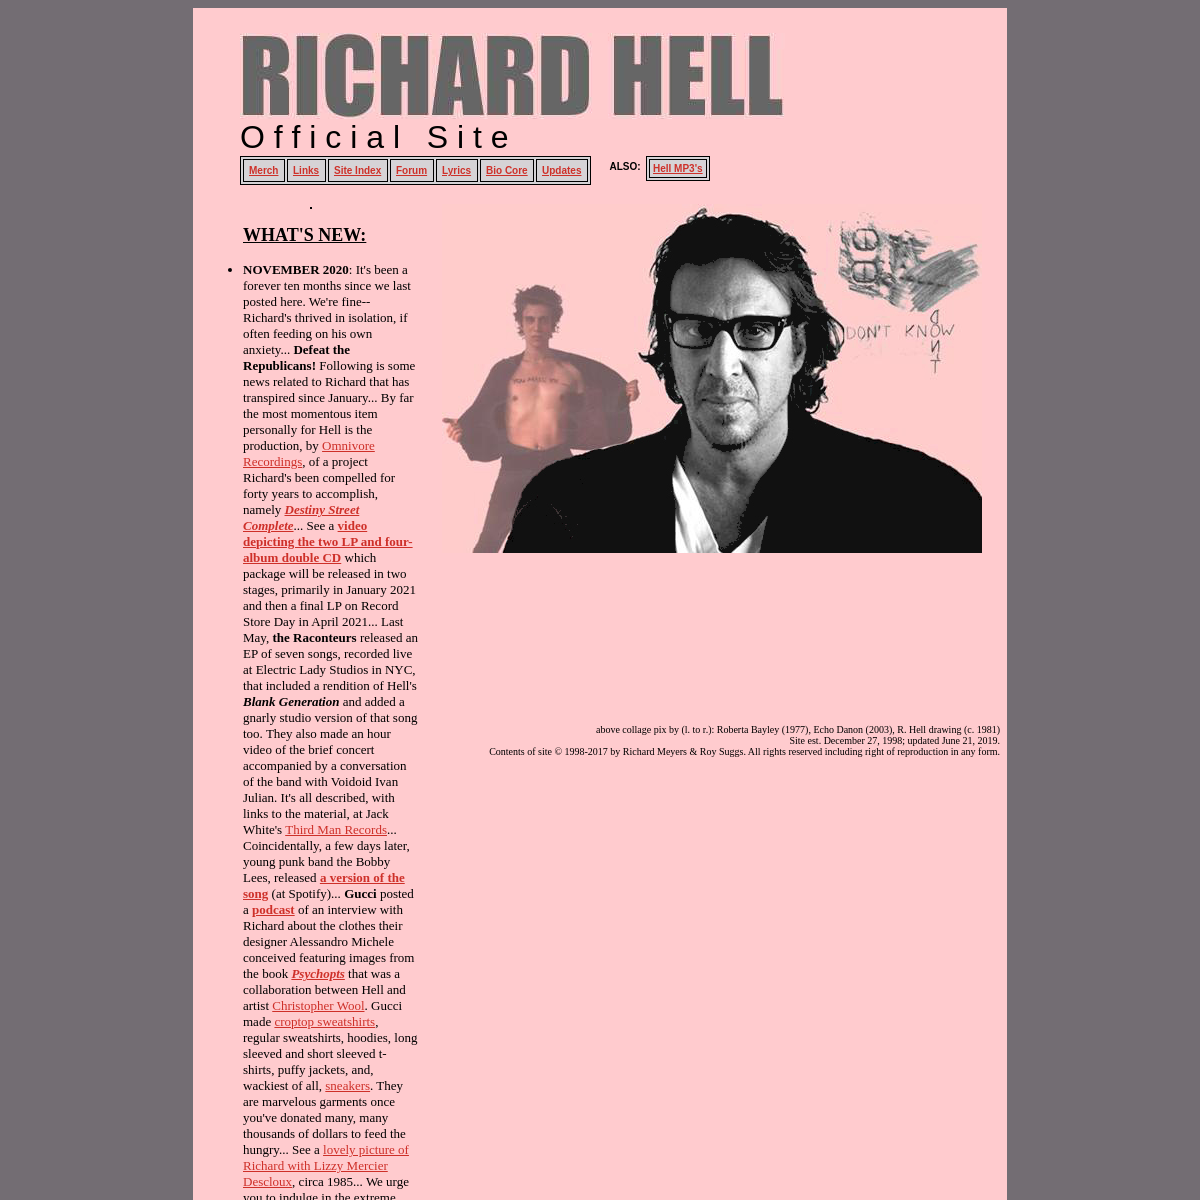 A complete backup of richardhell.com